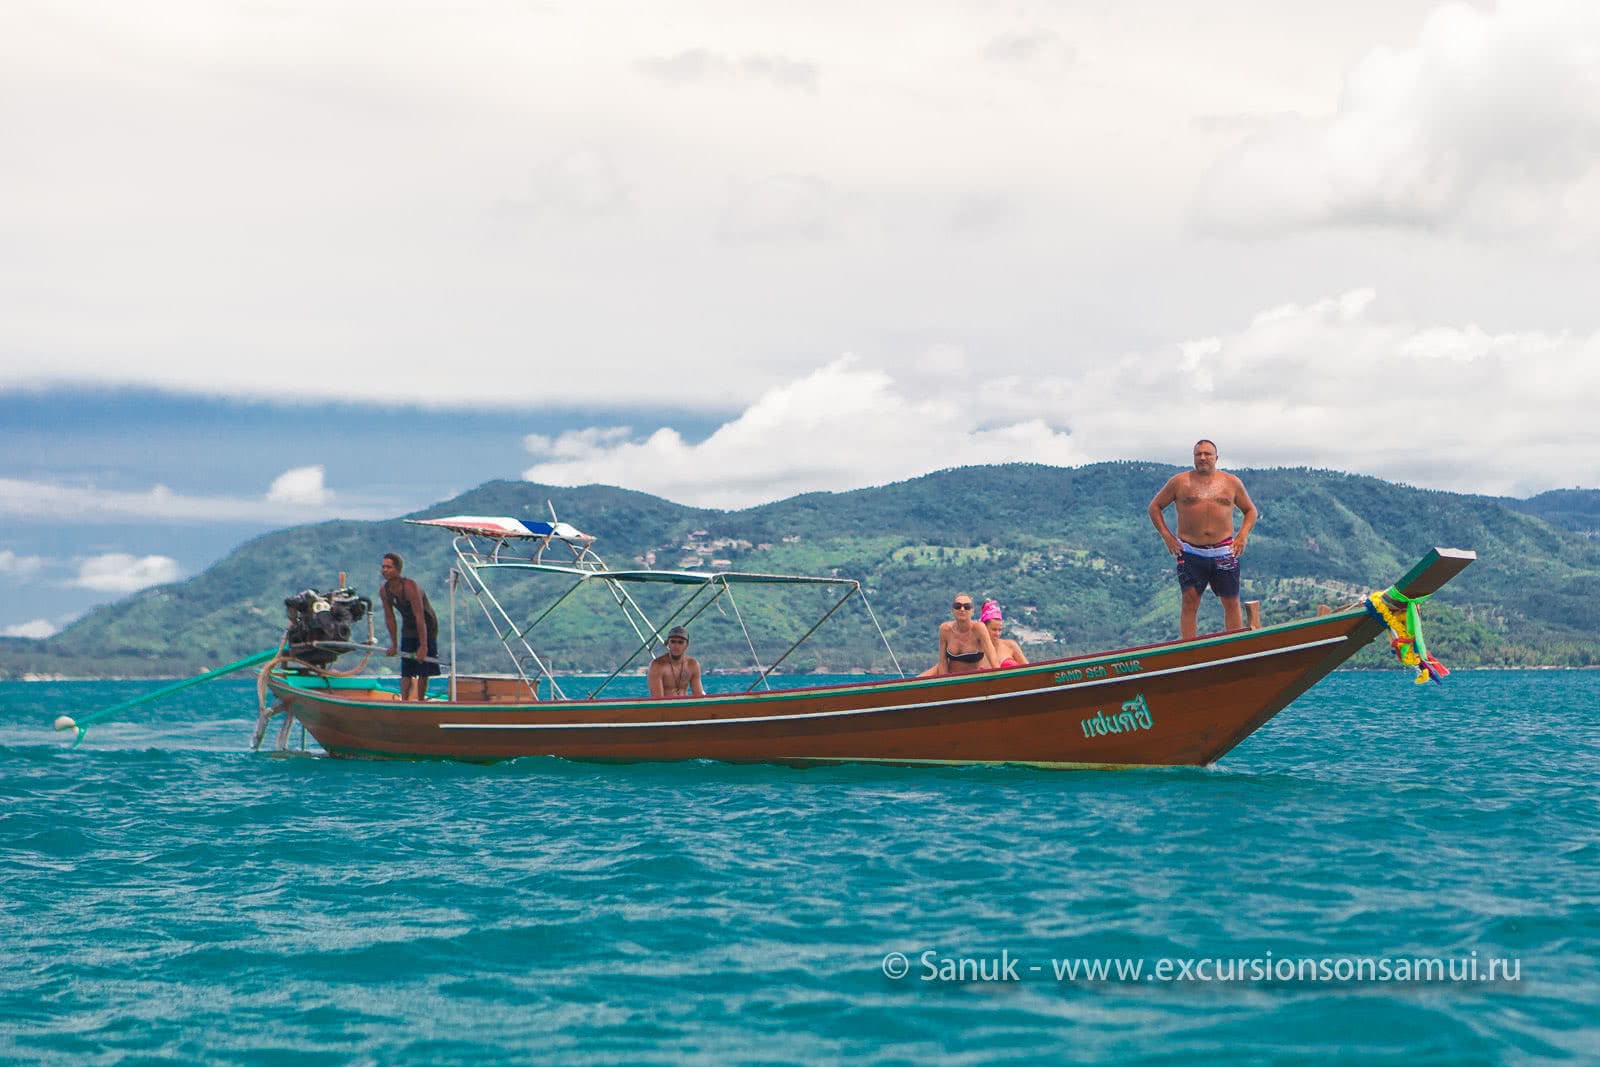 Snorkeling and fishing in the waters of Koh Tan, Koh Samui, Thailand